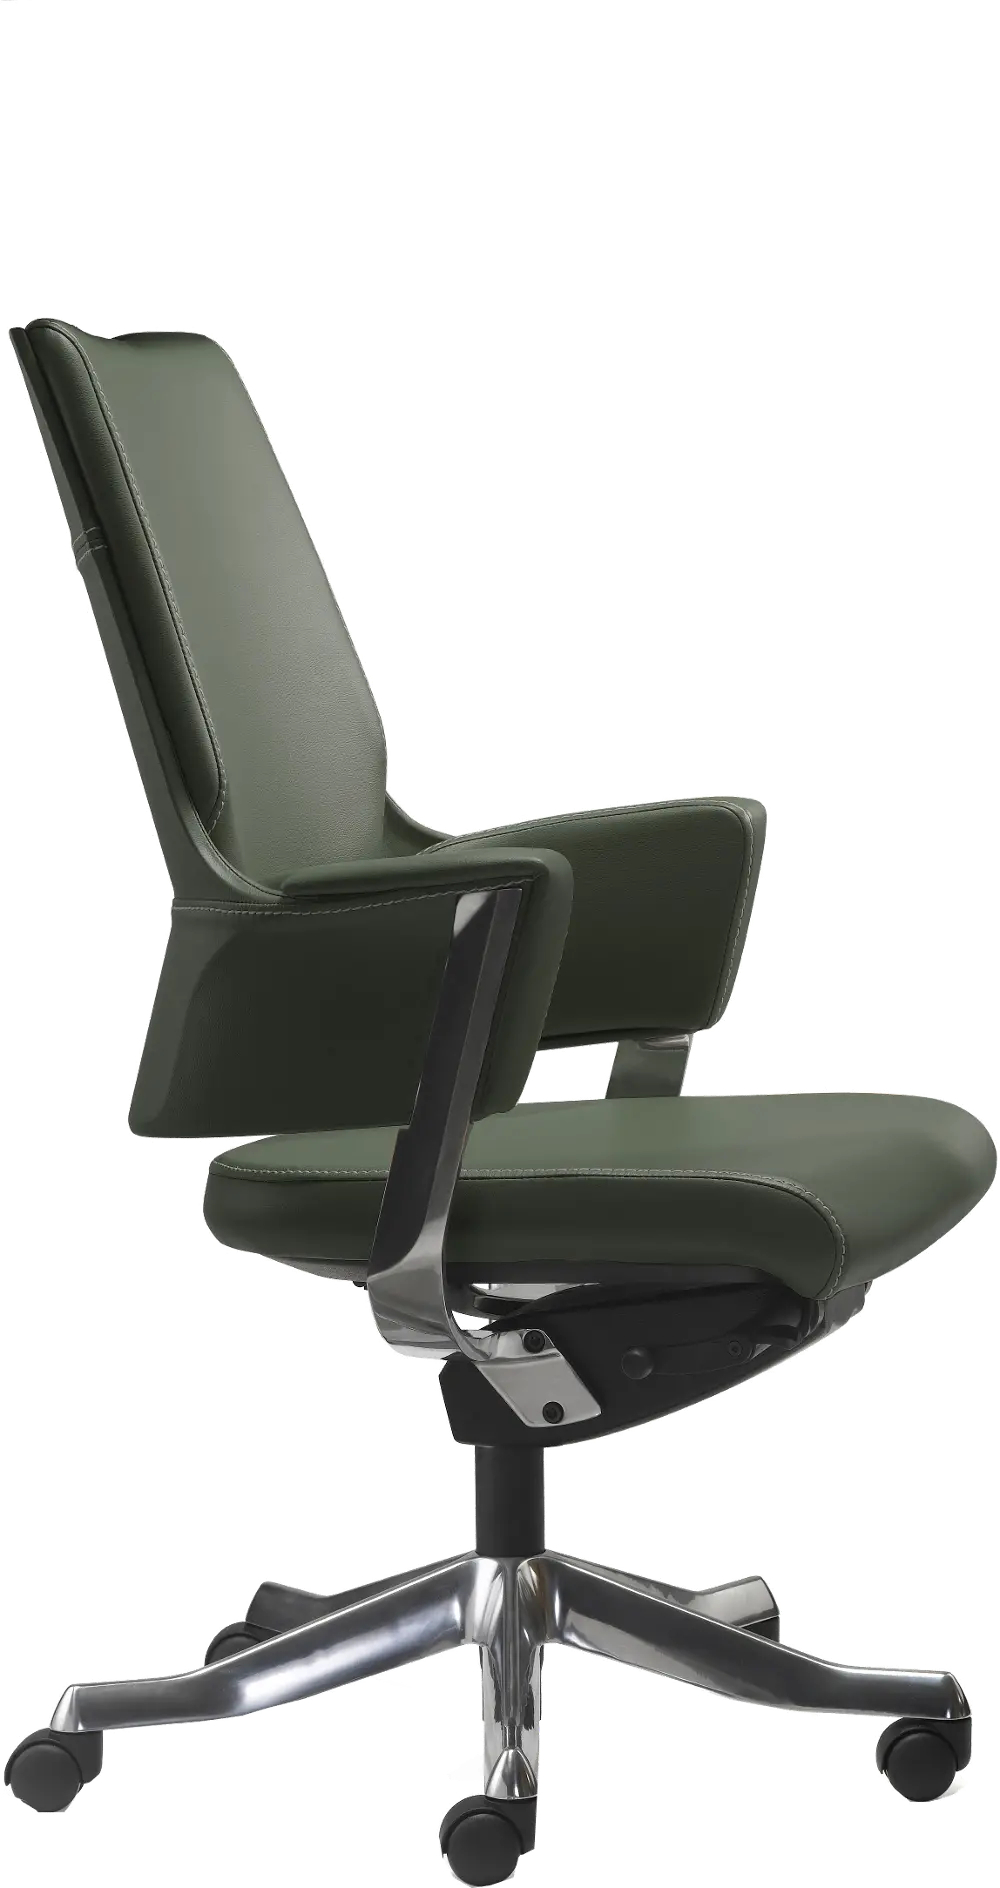 Gray Leather Office Chair - 5016-1